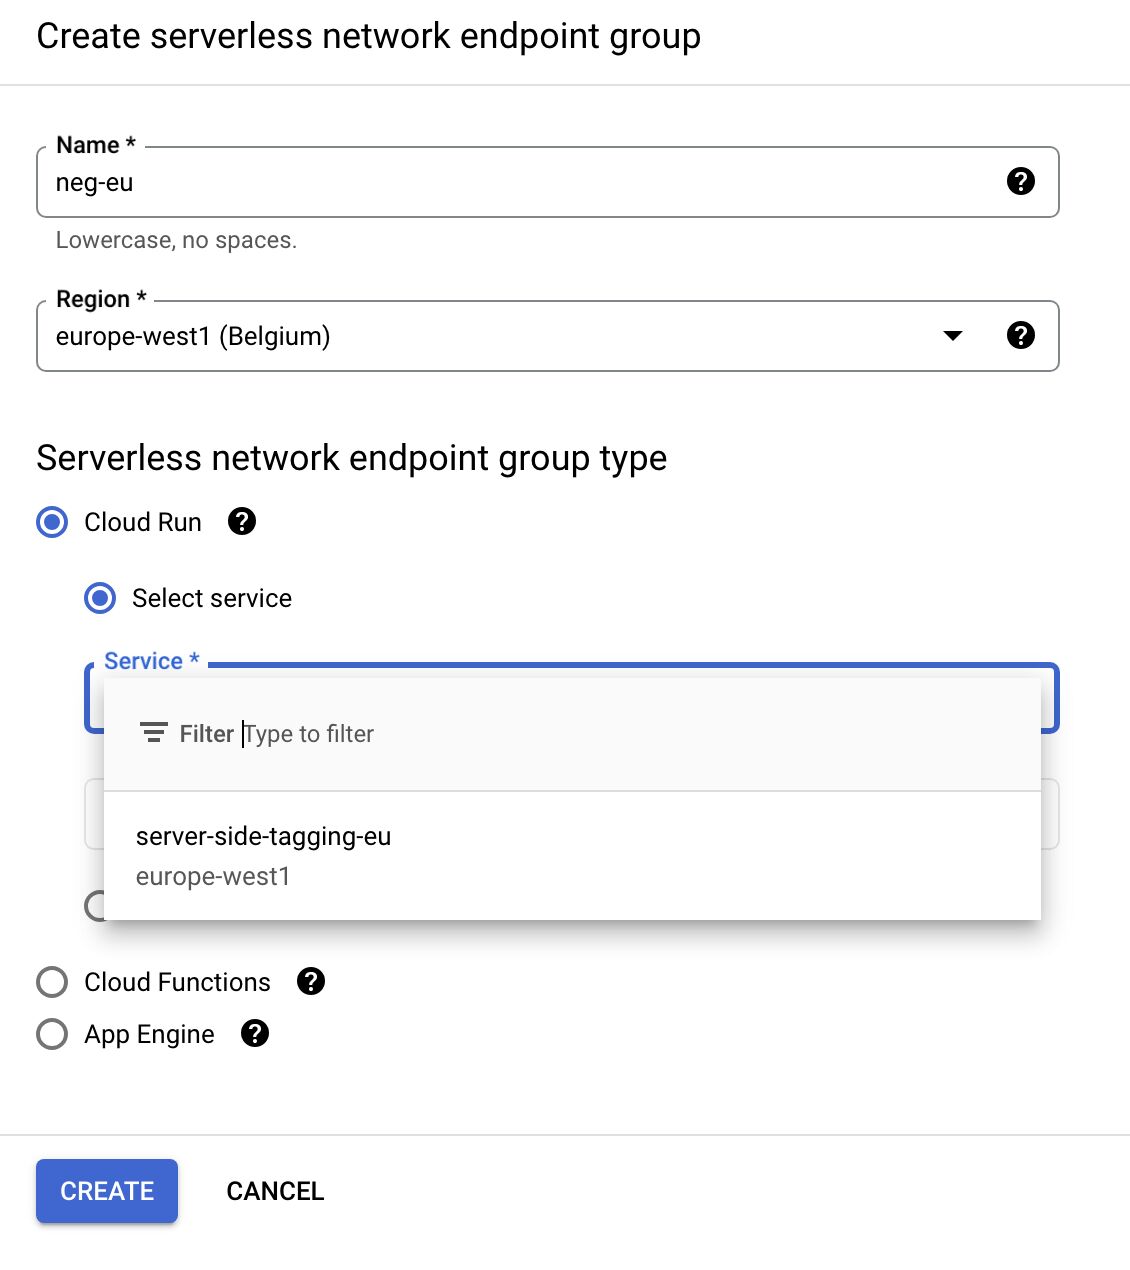 Add a network endpoint group